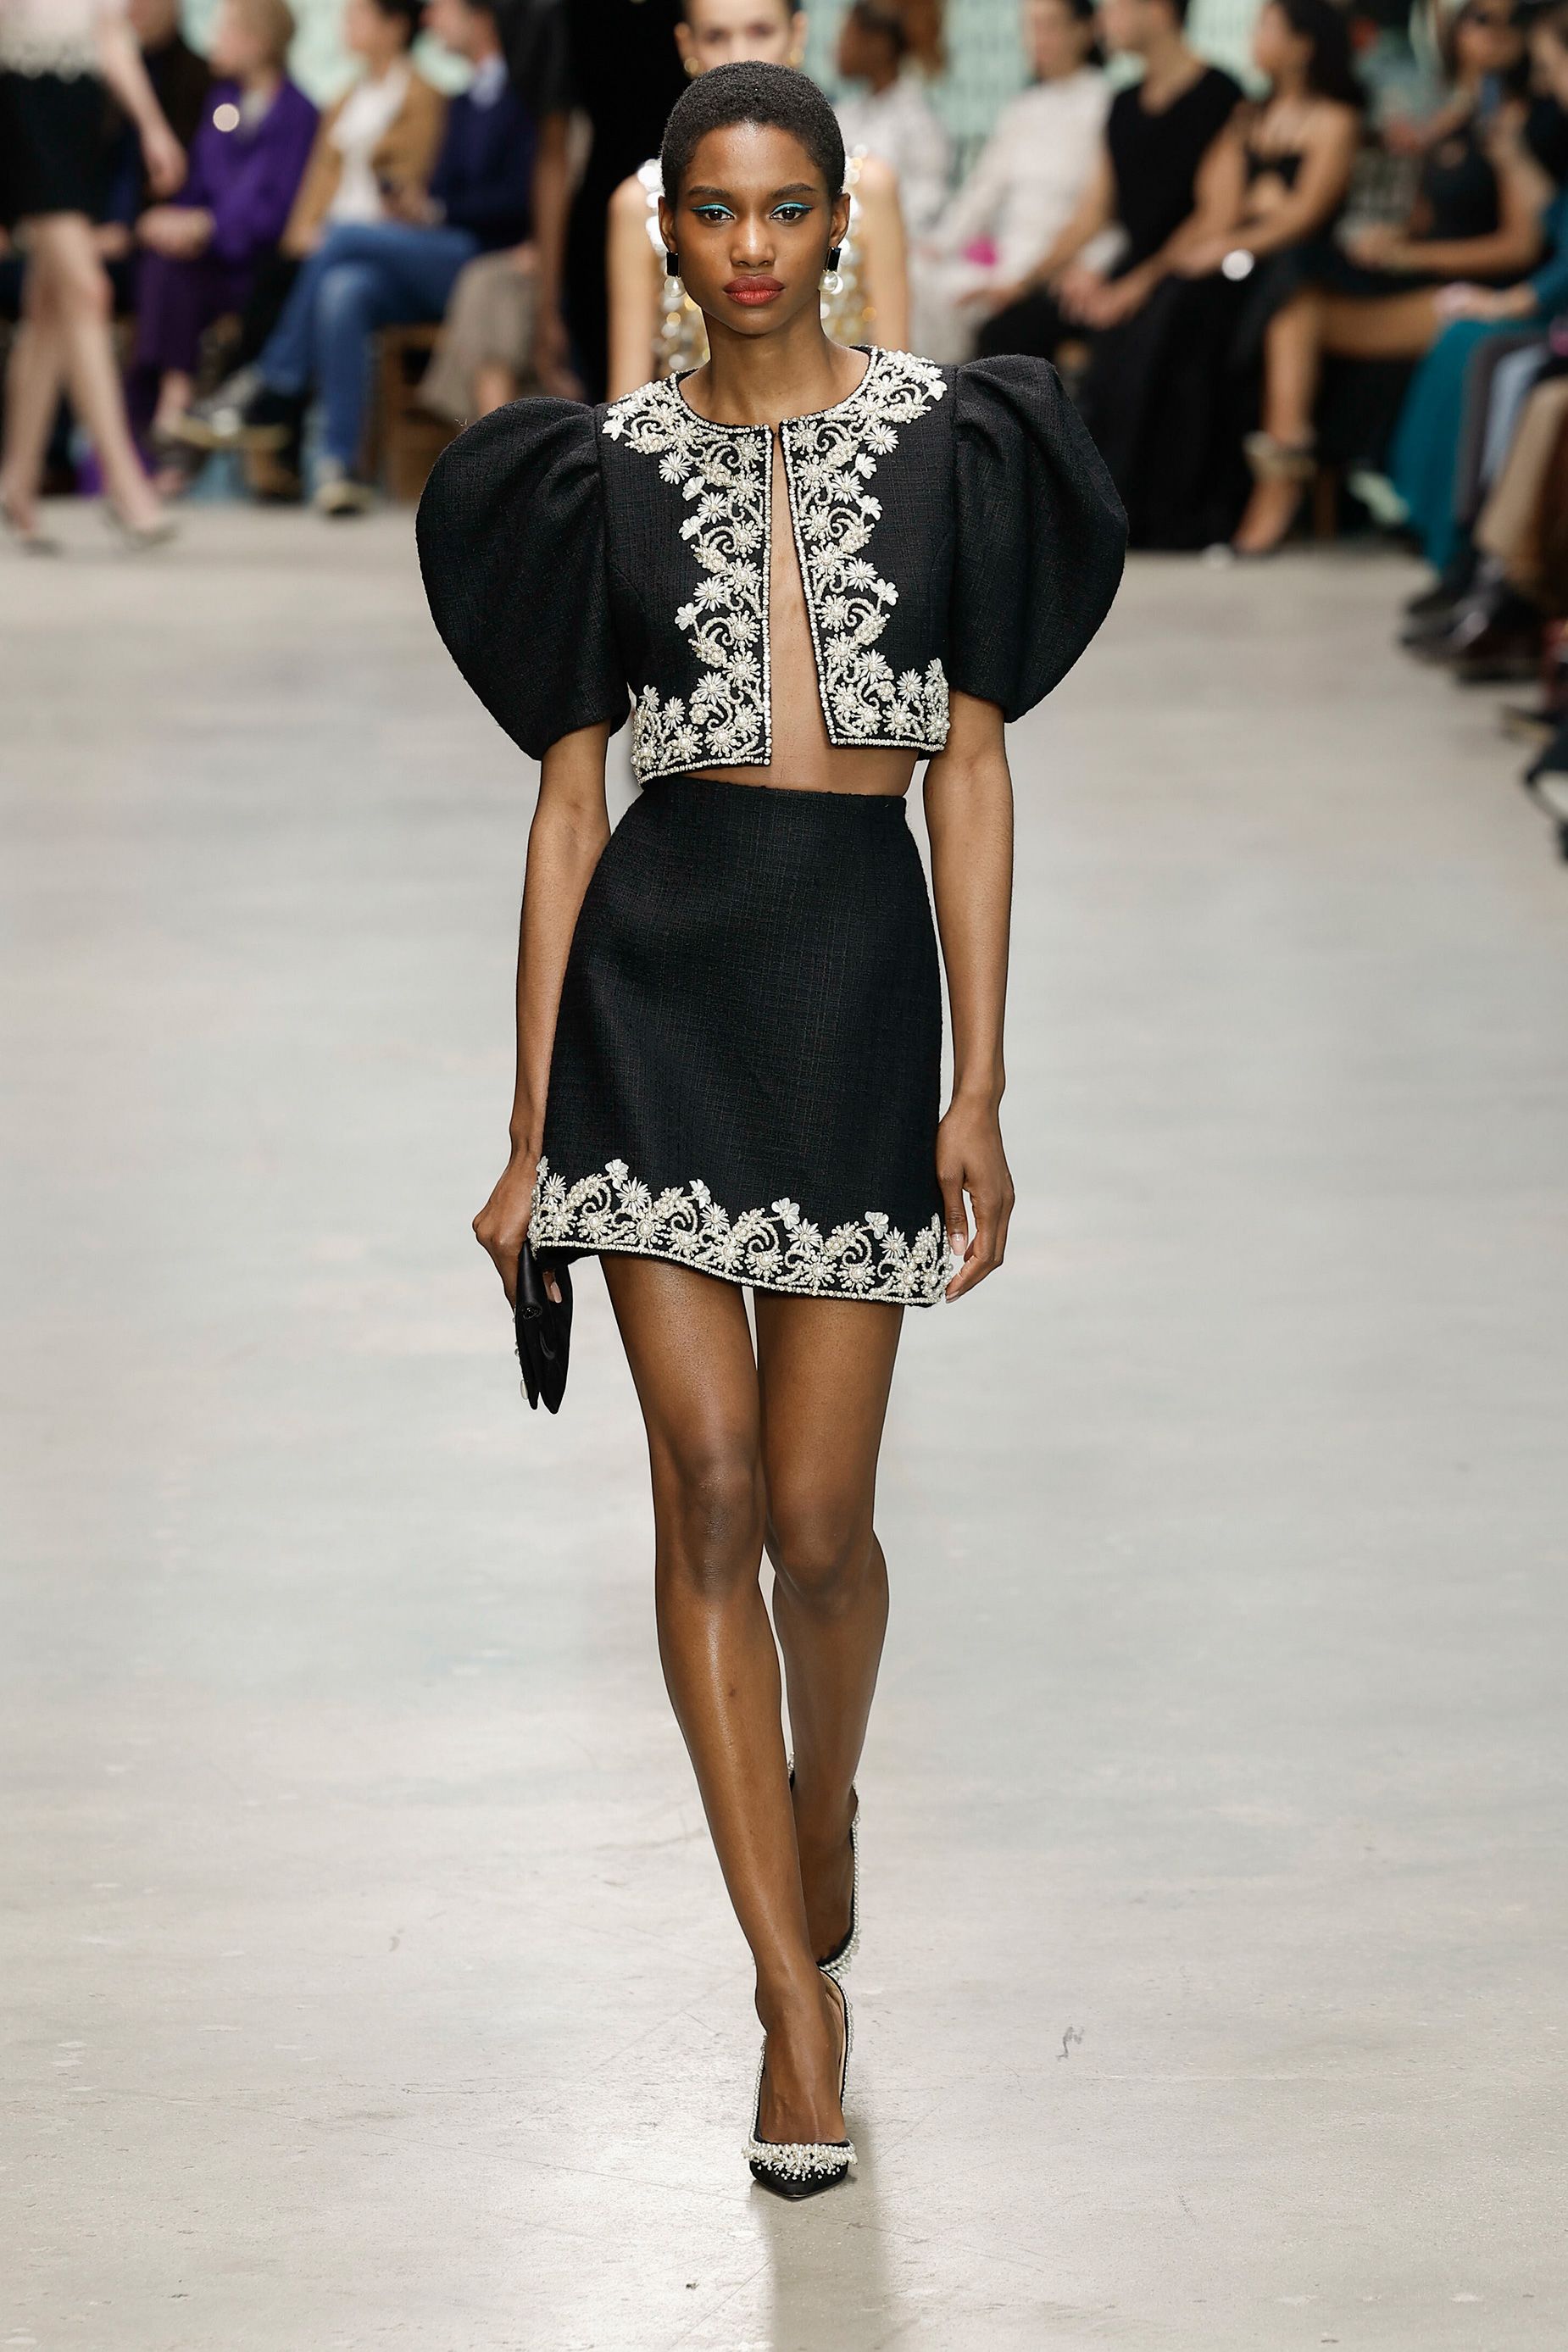 His latest collection contrasted architectural shapes with ruffles and swirling embroidery.